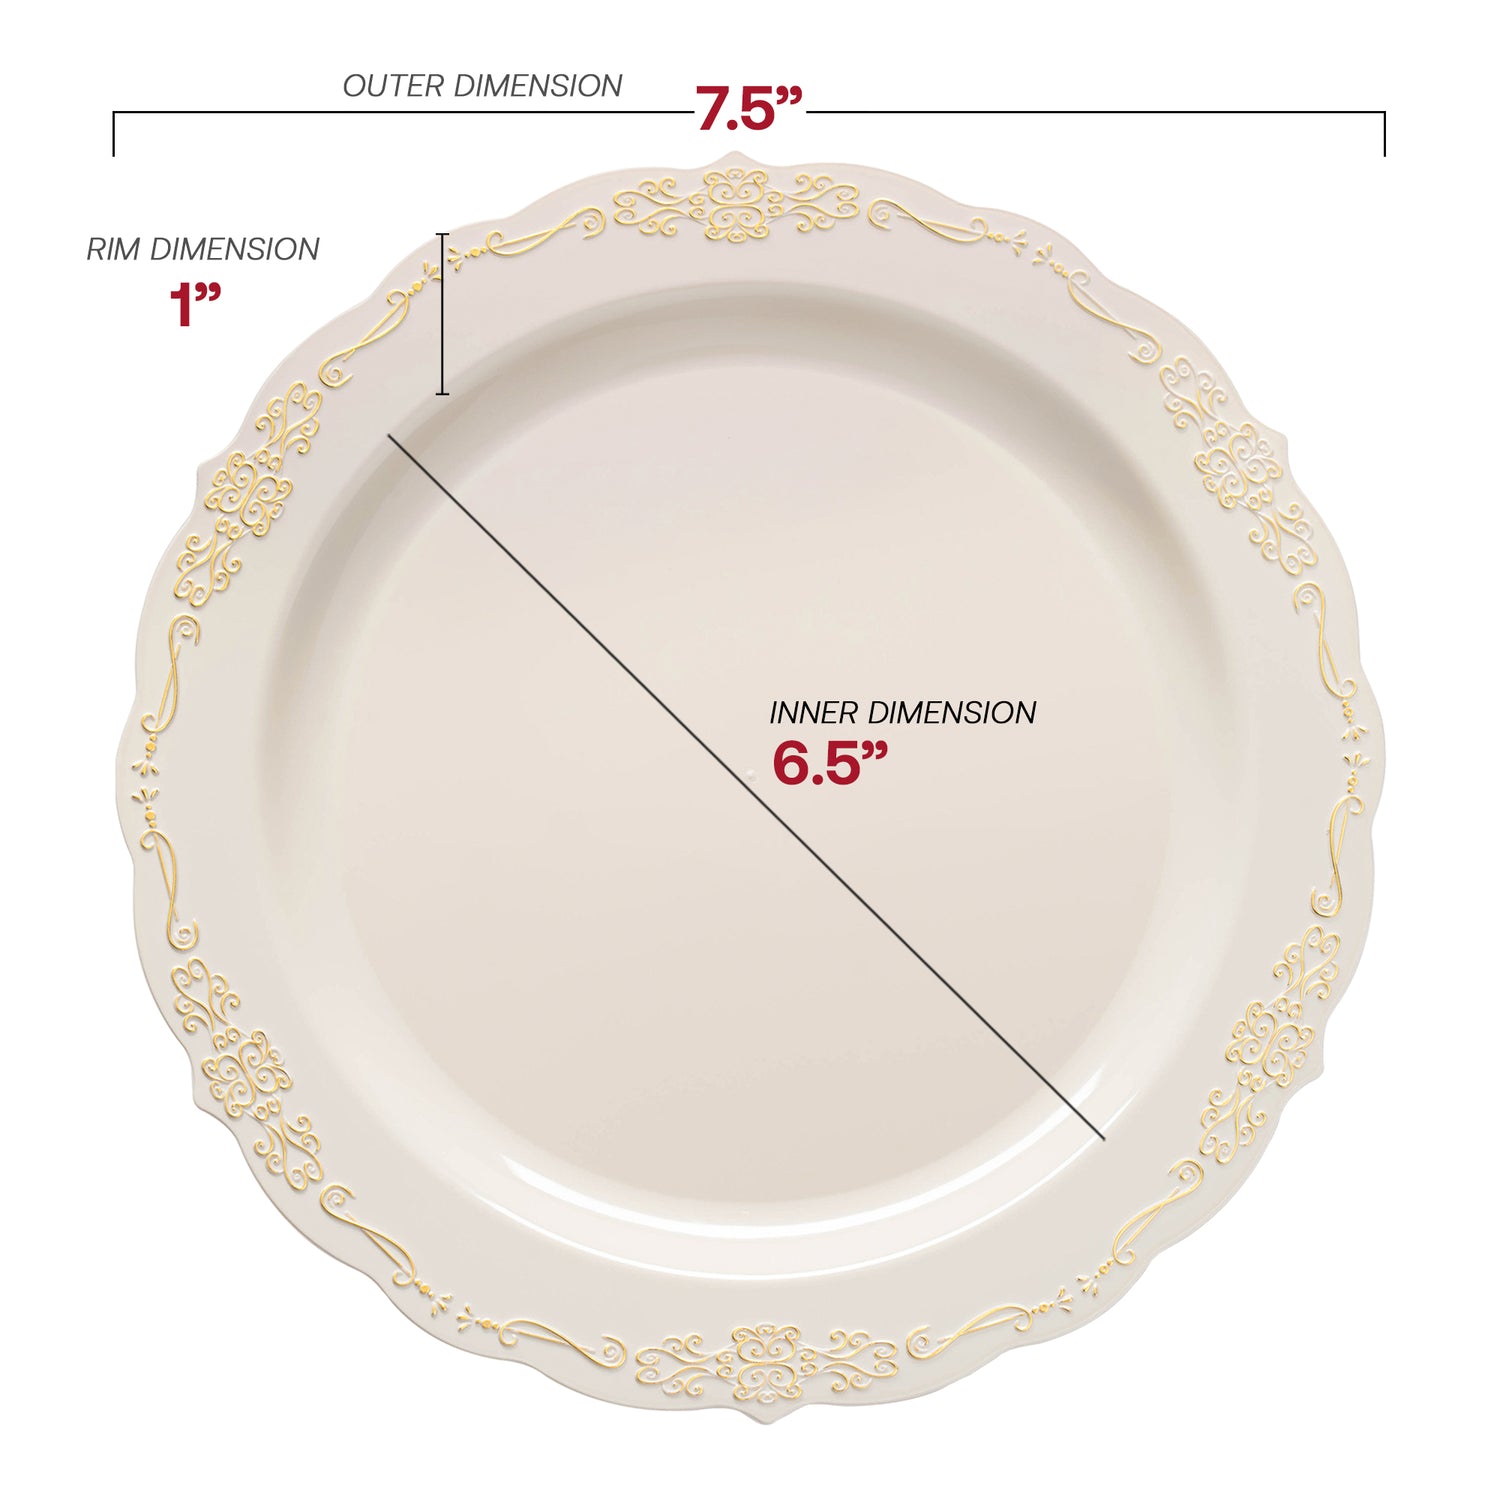 Ivory with Gold Vintage Rim Round Disposable Plastic Appetizer/Salad Plates (7.5") Dimension | The Kaya Collection